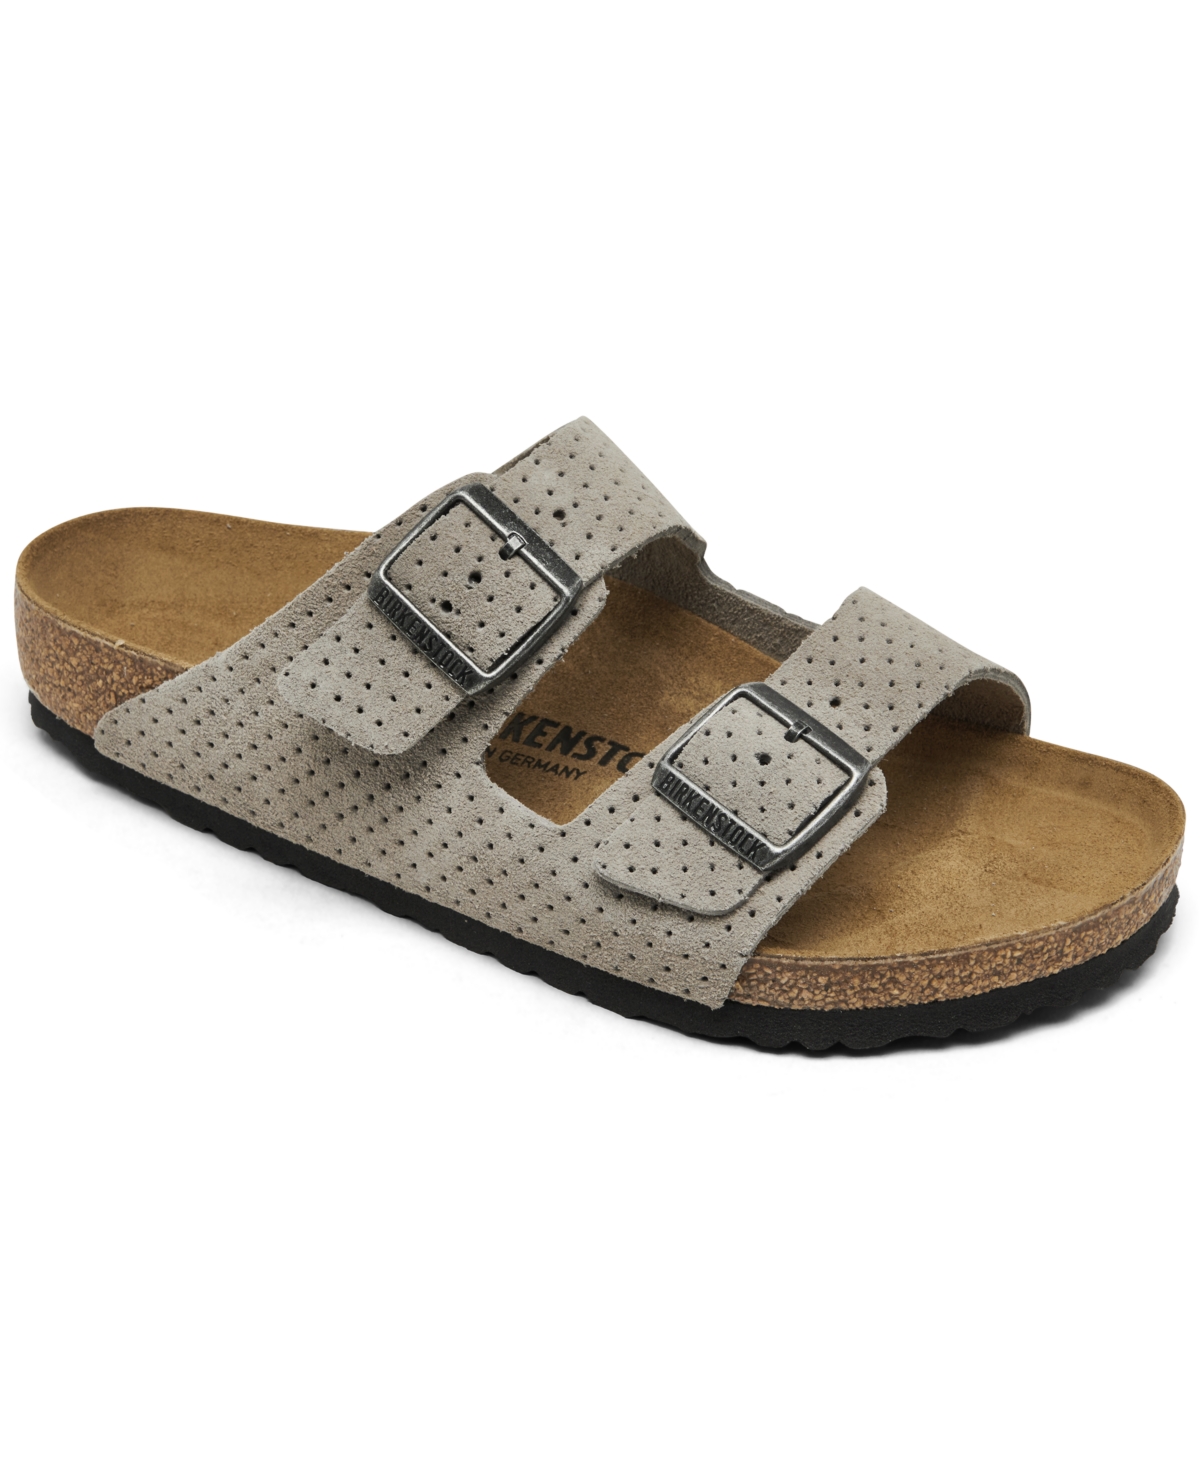 Men's Arizona Suede Embossed Dotted Adjustable Slide Sandals from Finish Line - Gray